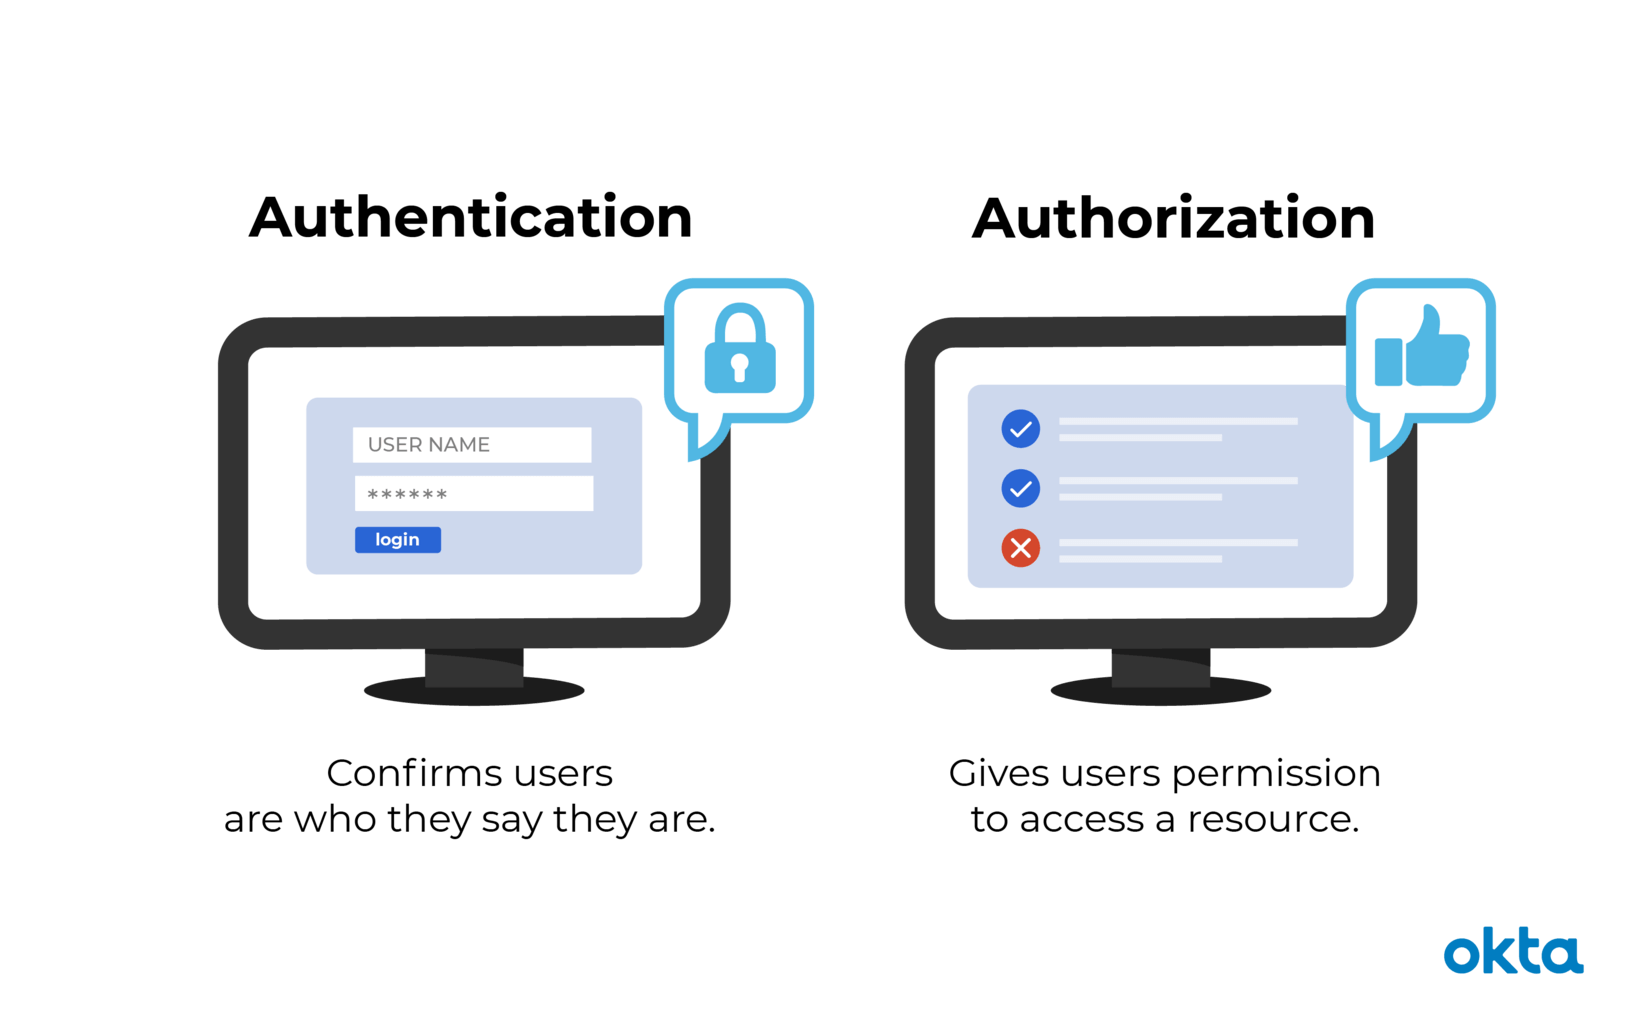 what is the difference between authentication and authorization?